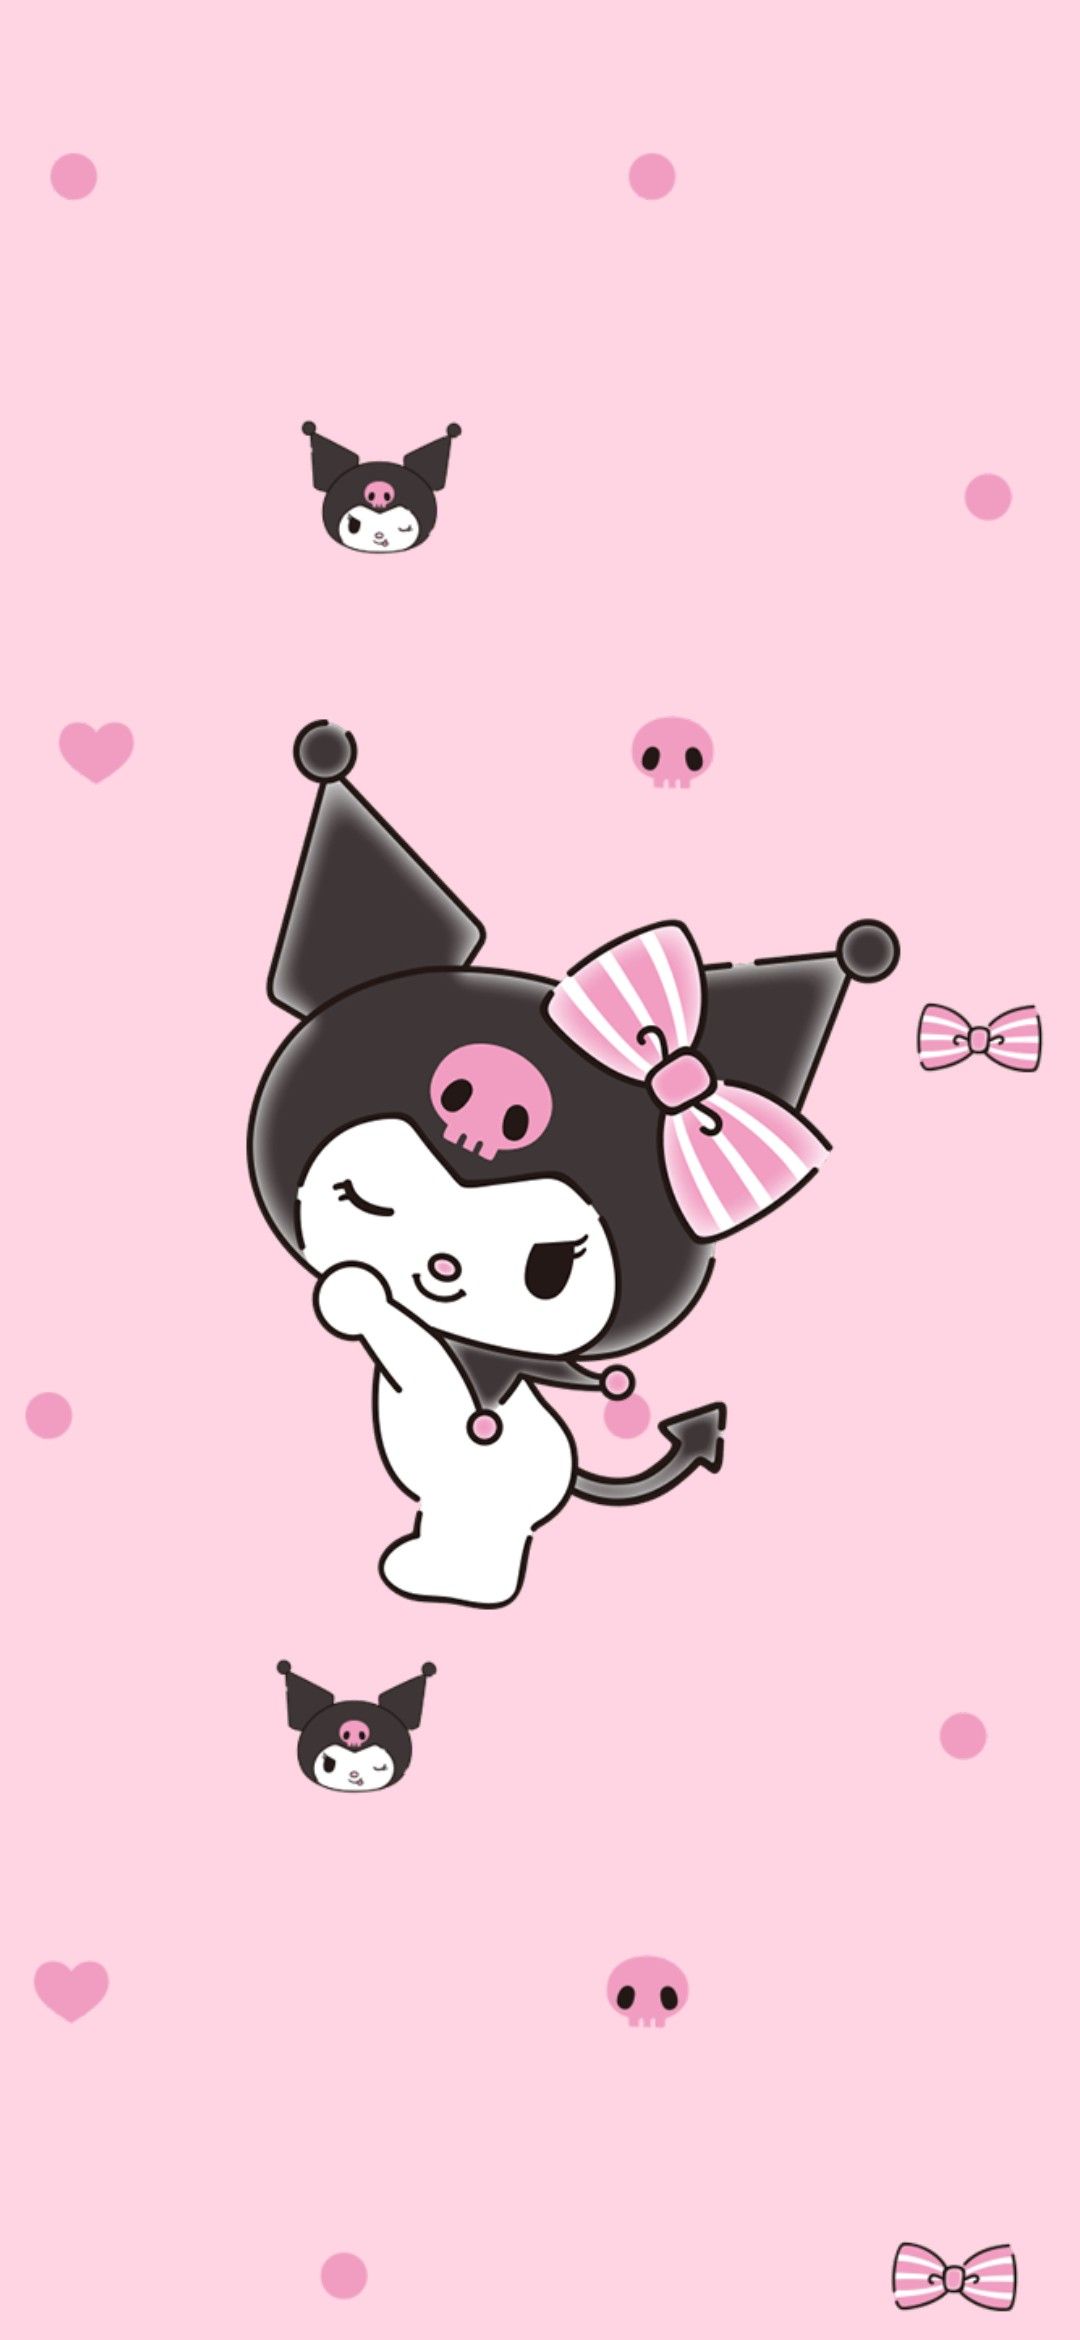 A cute pink and black cat with bows on its head - Kuromi